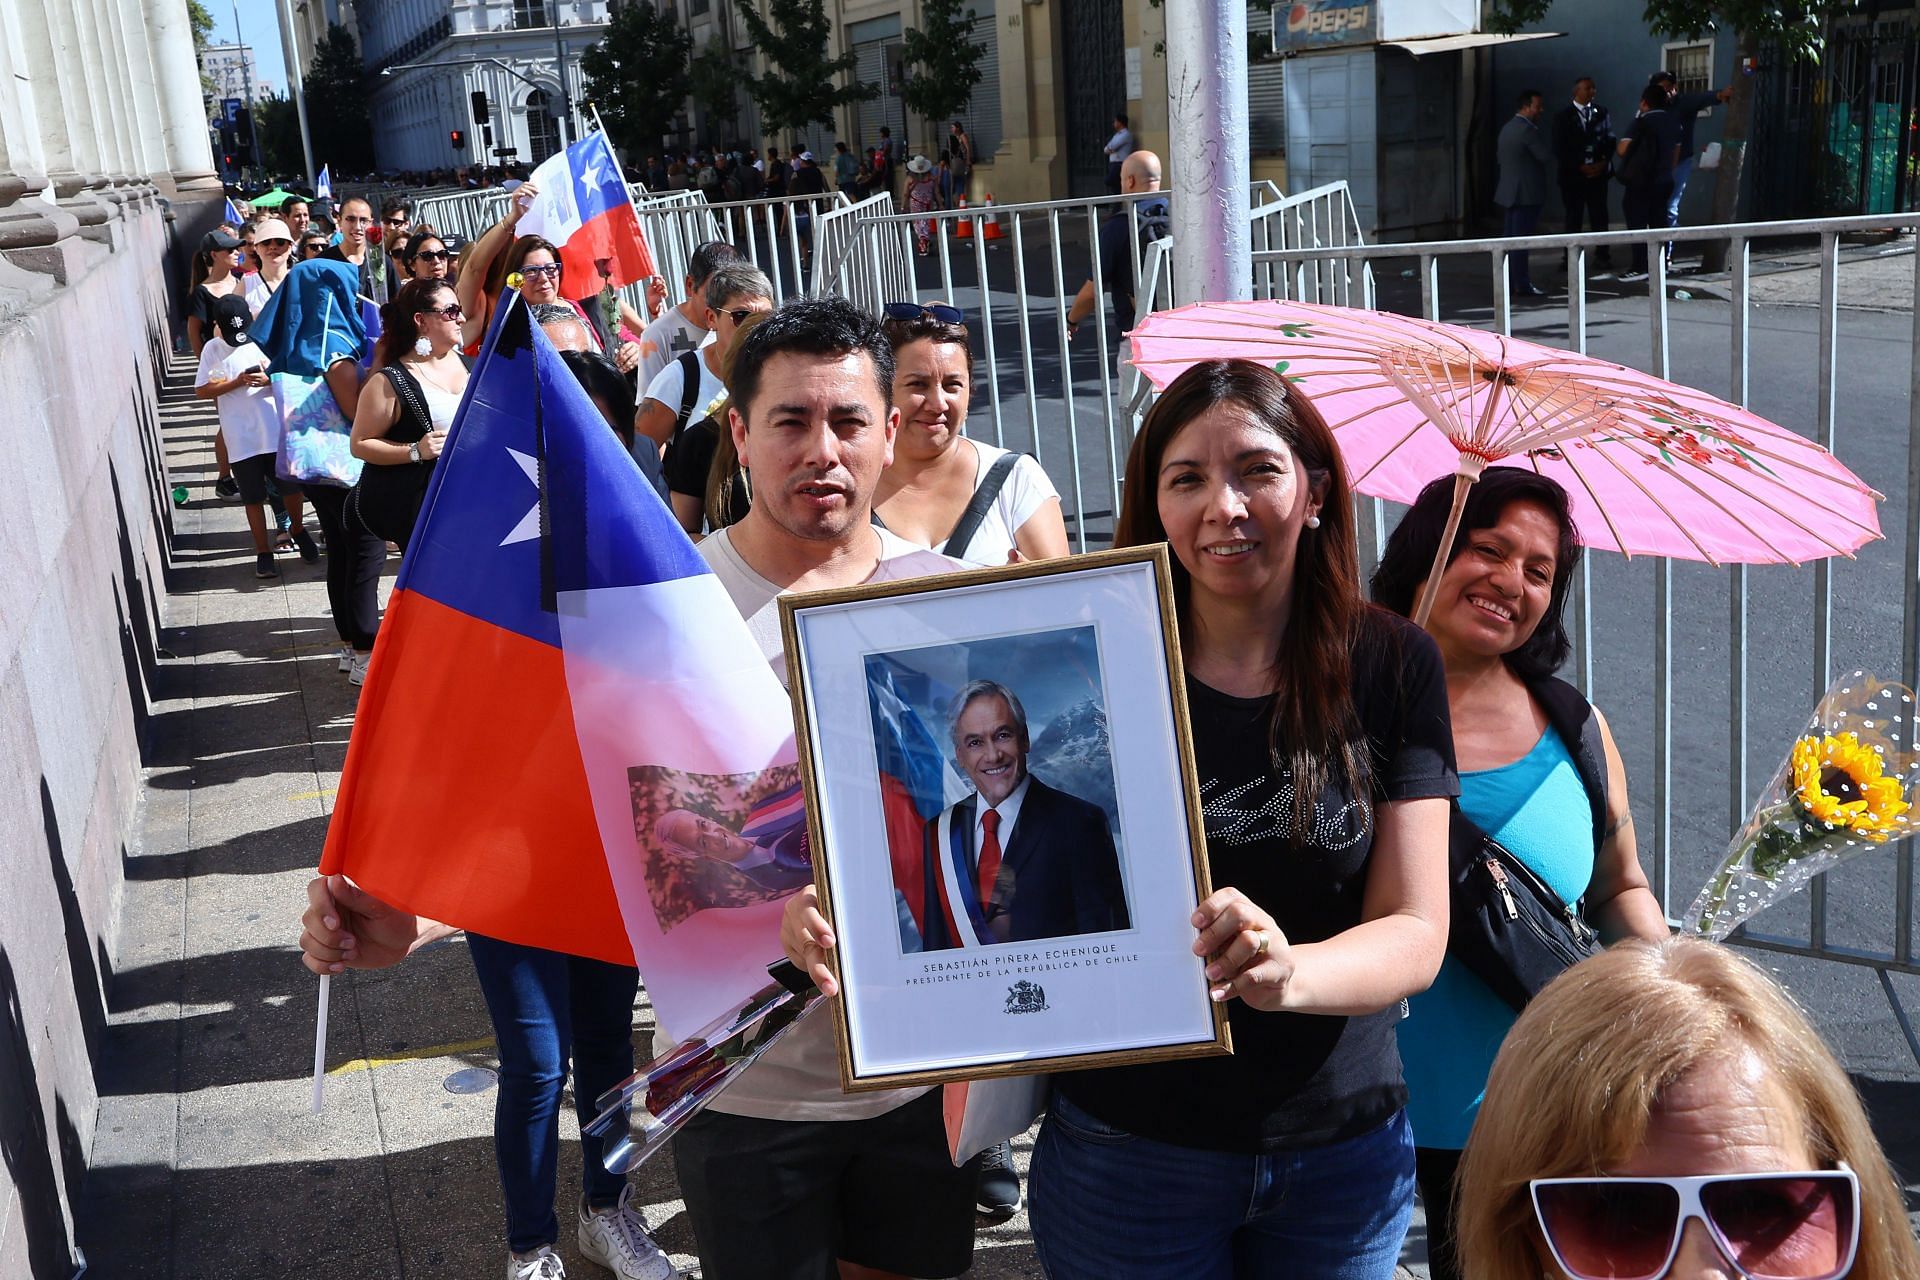 Chilean citizens form queues outside the National Congress to pay their respects to the coffin of ex-president Sebasti&aacute;n Pi&ntilde;era (Image via Getty Images/Marcelo Hernandez)